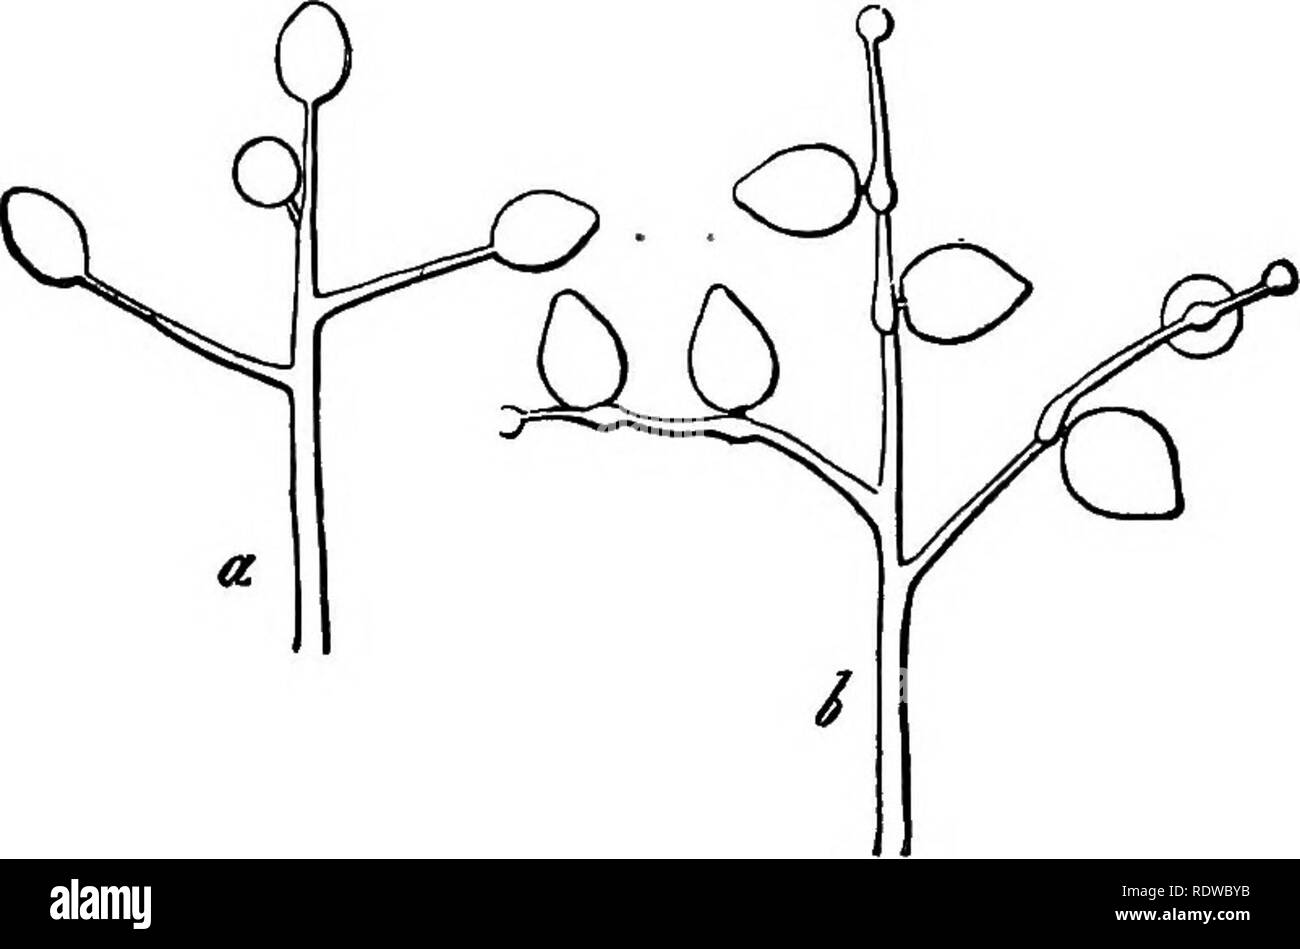 . The essentials of botany. Botany. 140 ^OtAl^f. fungus which protrude through the epidermis of the liost. In the Mildews (species of Peronospora) these branches. Fio. 66.—Showing tips of two conidia-beaiing branches of Potato-mildew (Peronospora infestans). Highly magnified. find their way through the hreathing-pores, and bear their spores singly upon lateral branchlets (Fig. 66); in the White Rusts (species of Cystopus) the conidia-bearing branches collect under the epidermis and rupture it. Here the coni- dia are borne in chains or bead-like rows (Fig. 67). 292. In some species the conidia  Stock Photo